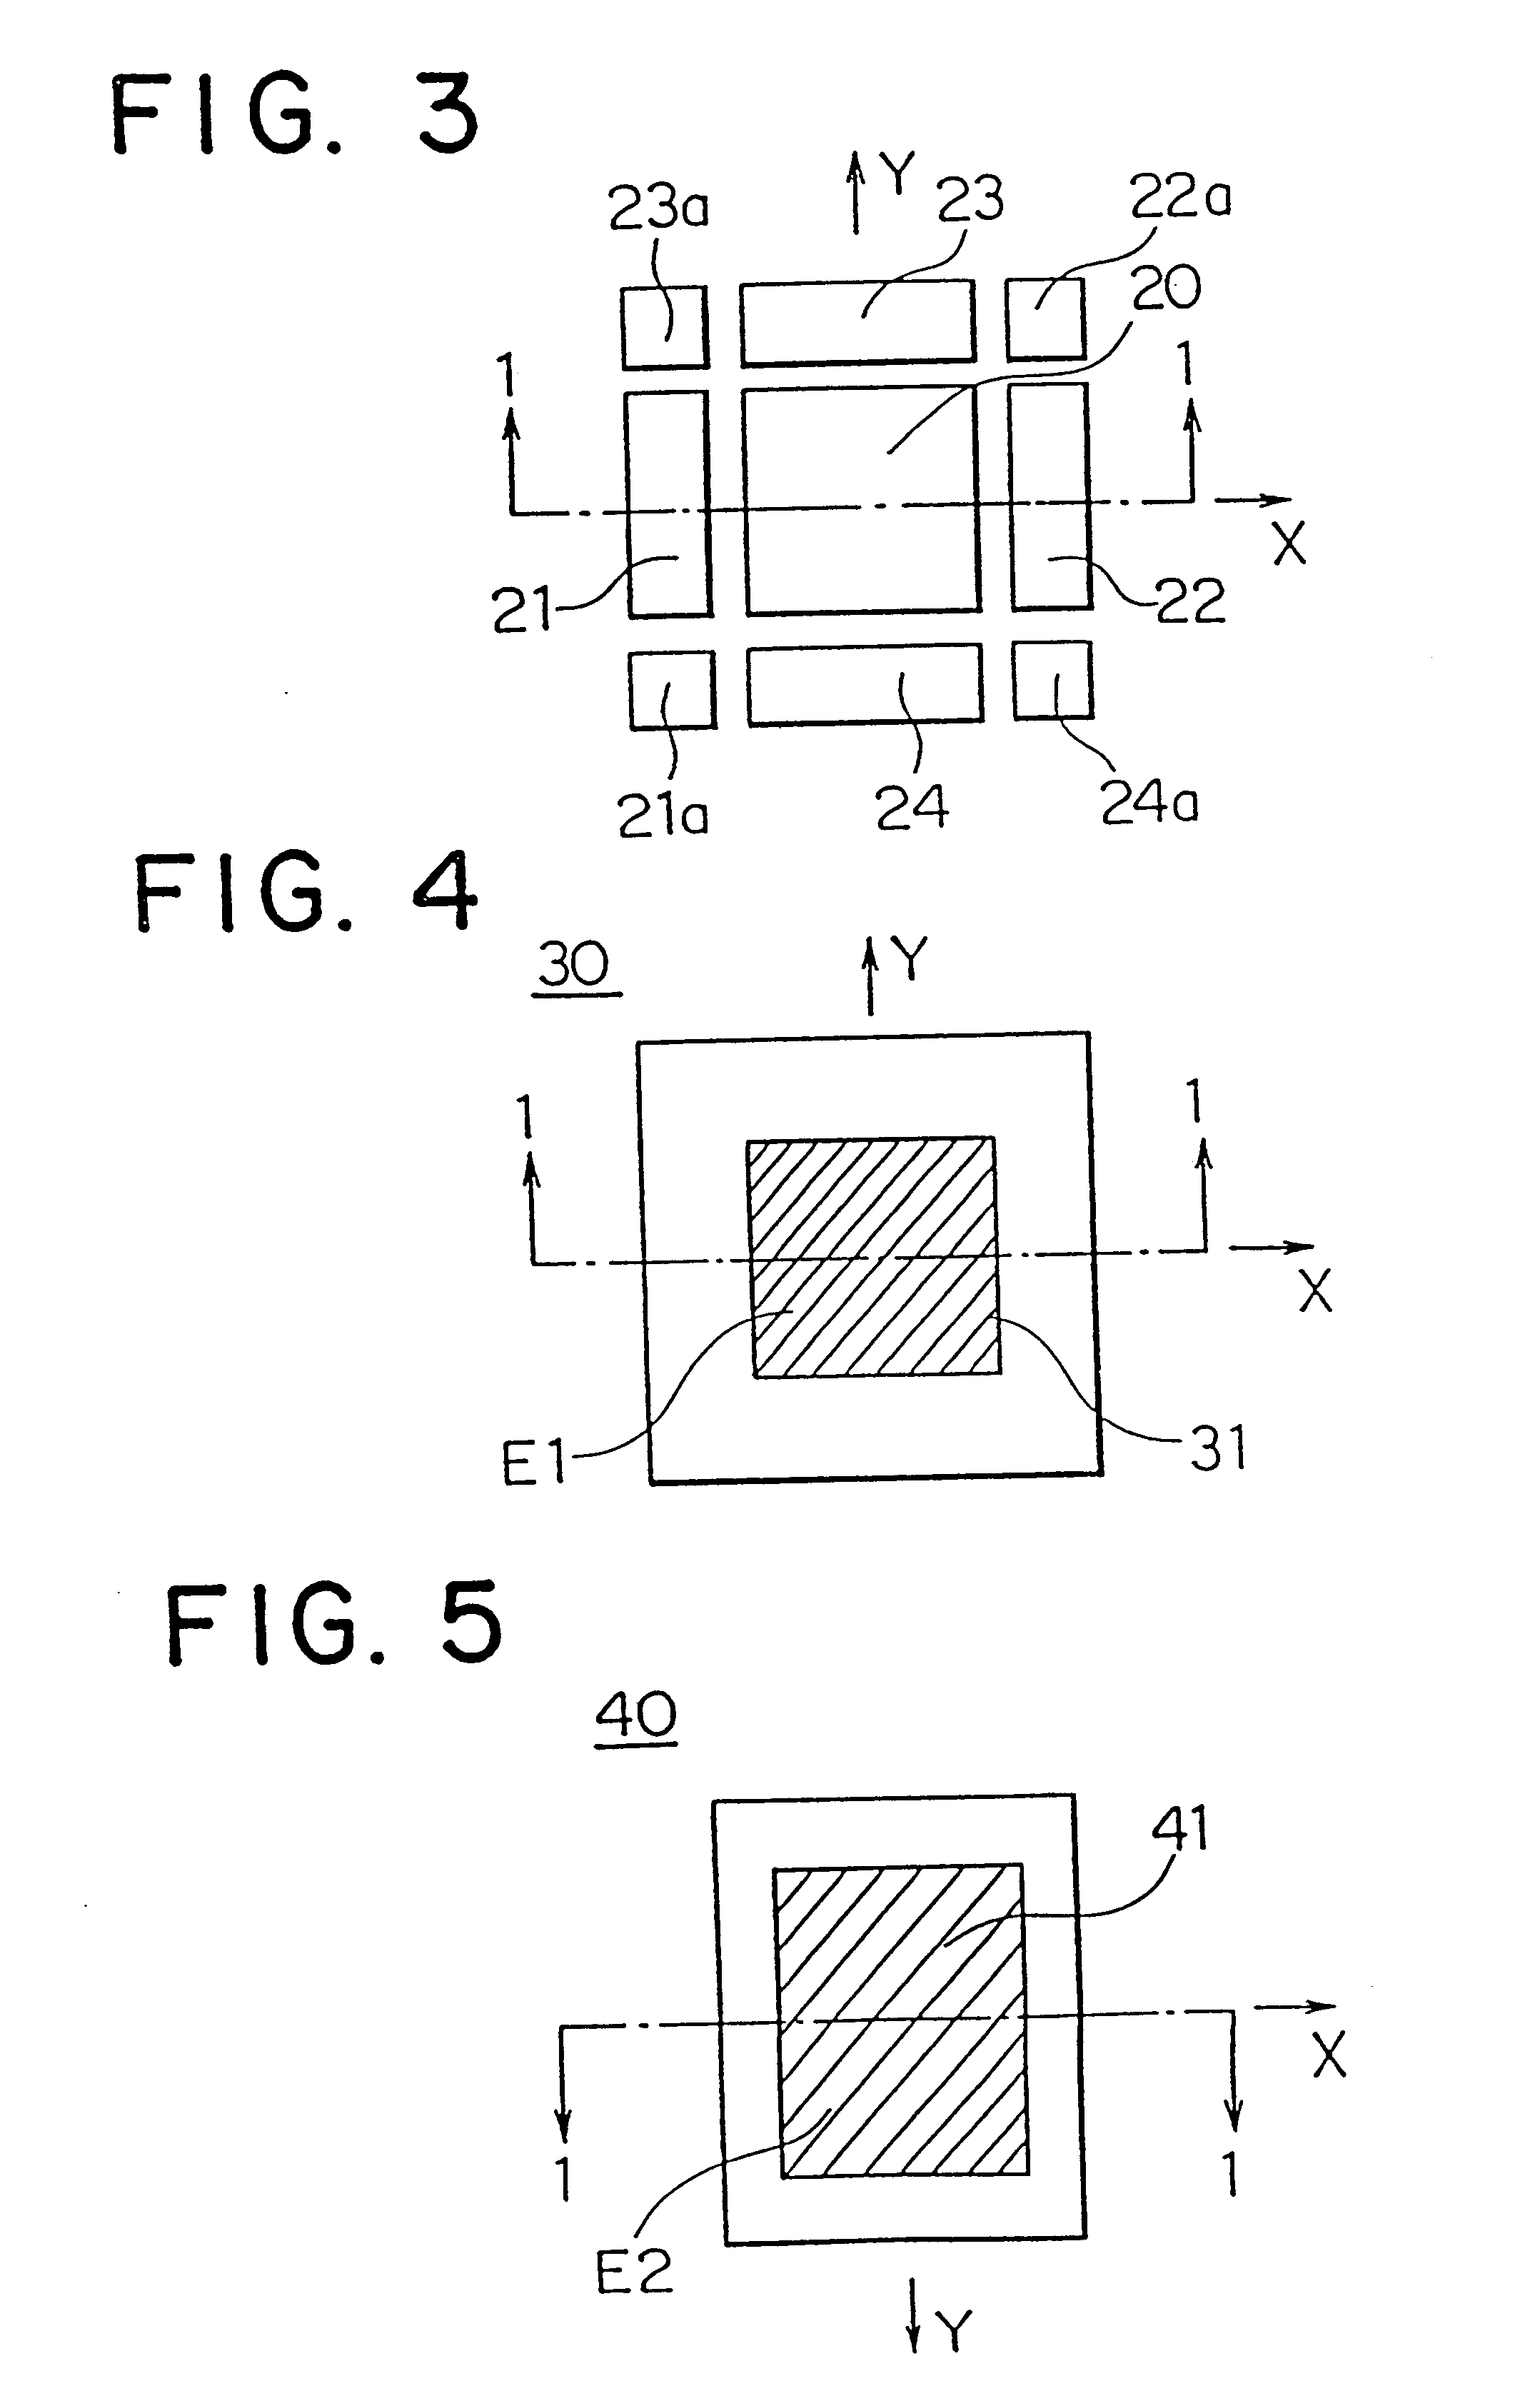 Method of manufacturing a sensor detecting a physical action as an applied force